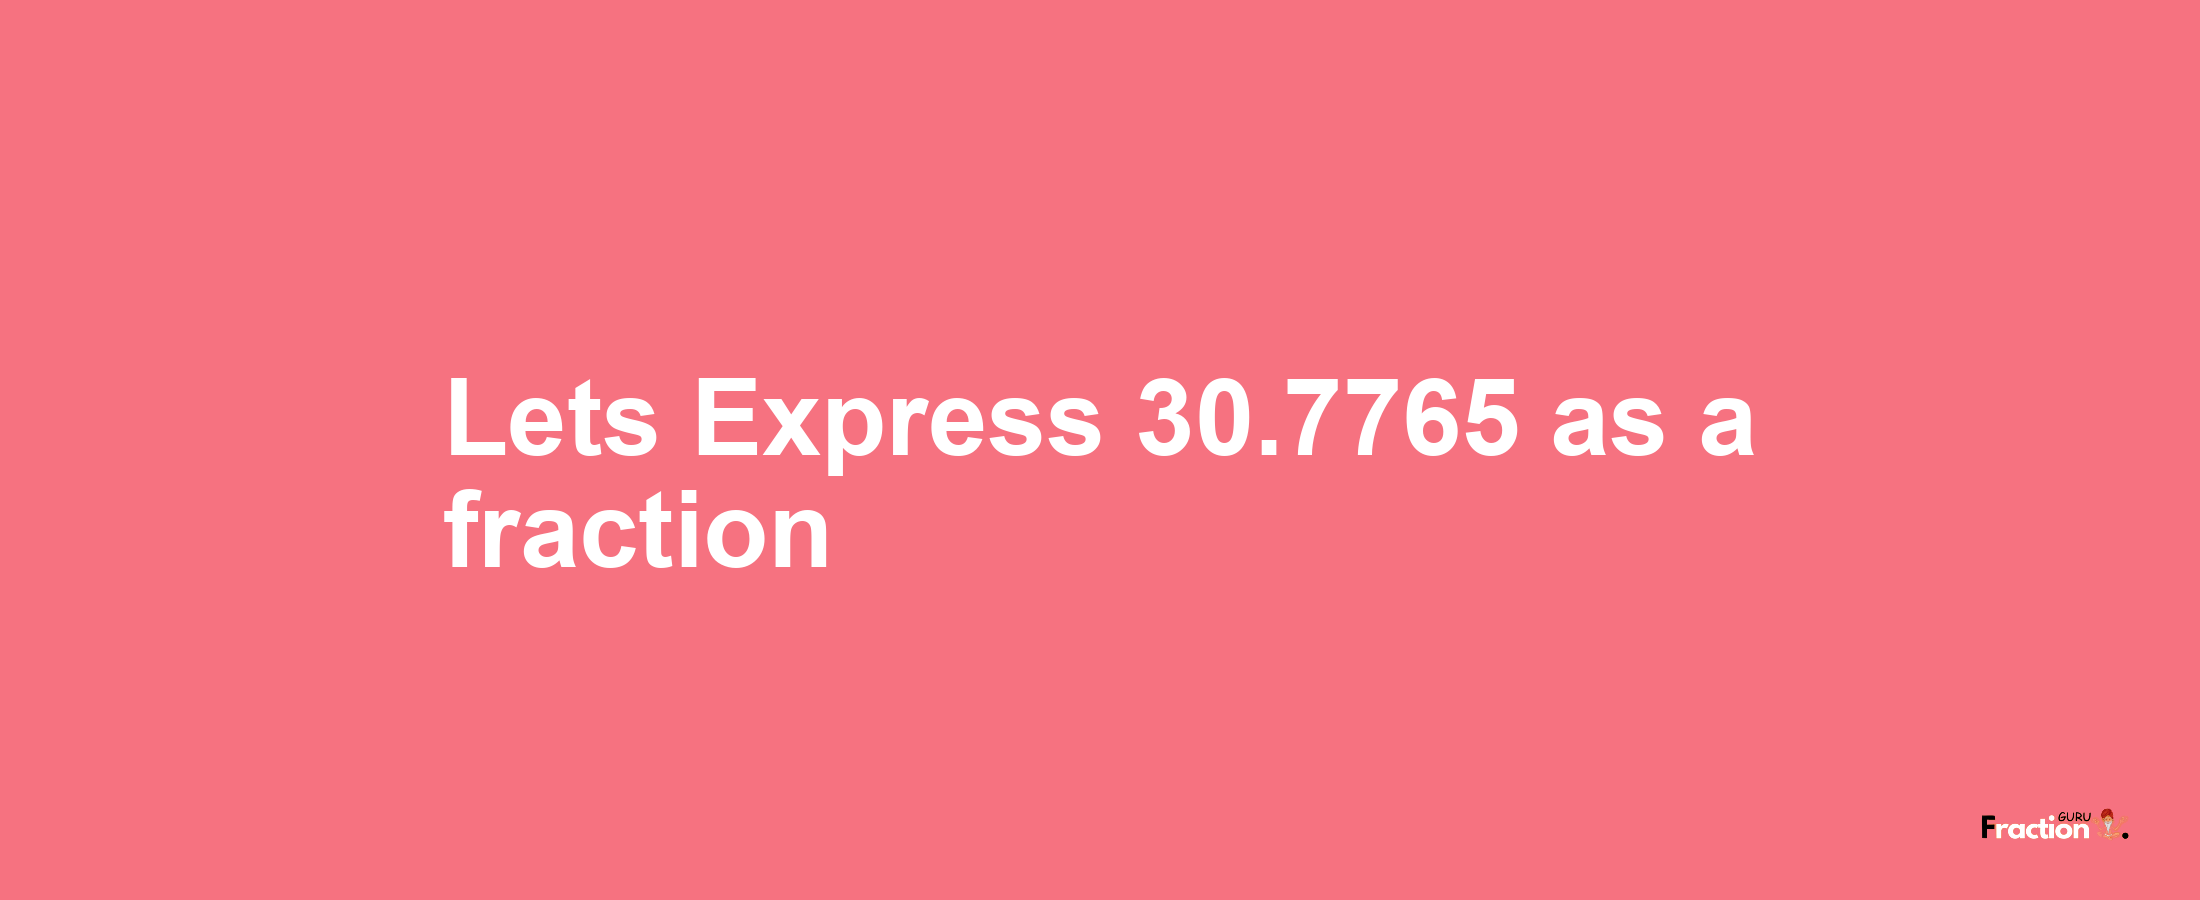 Lets Express 30.7765 as afraction